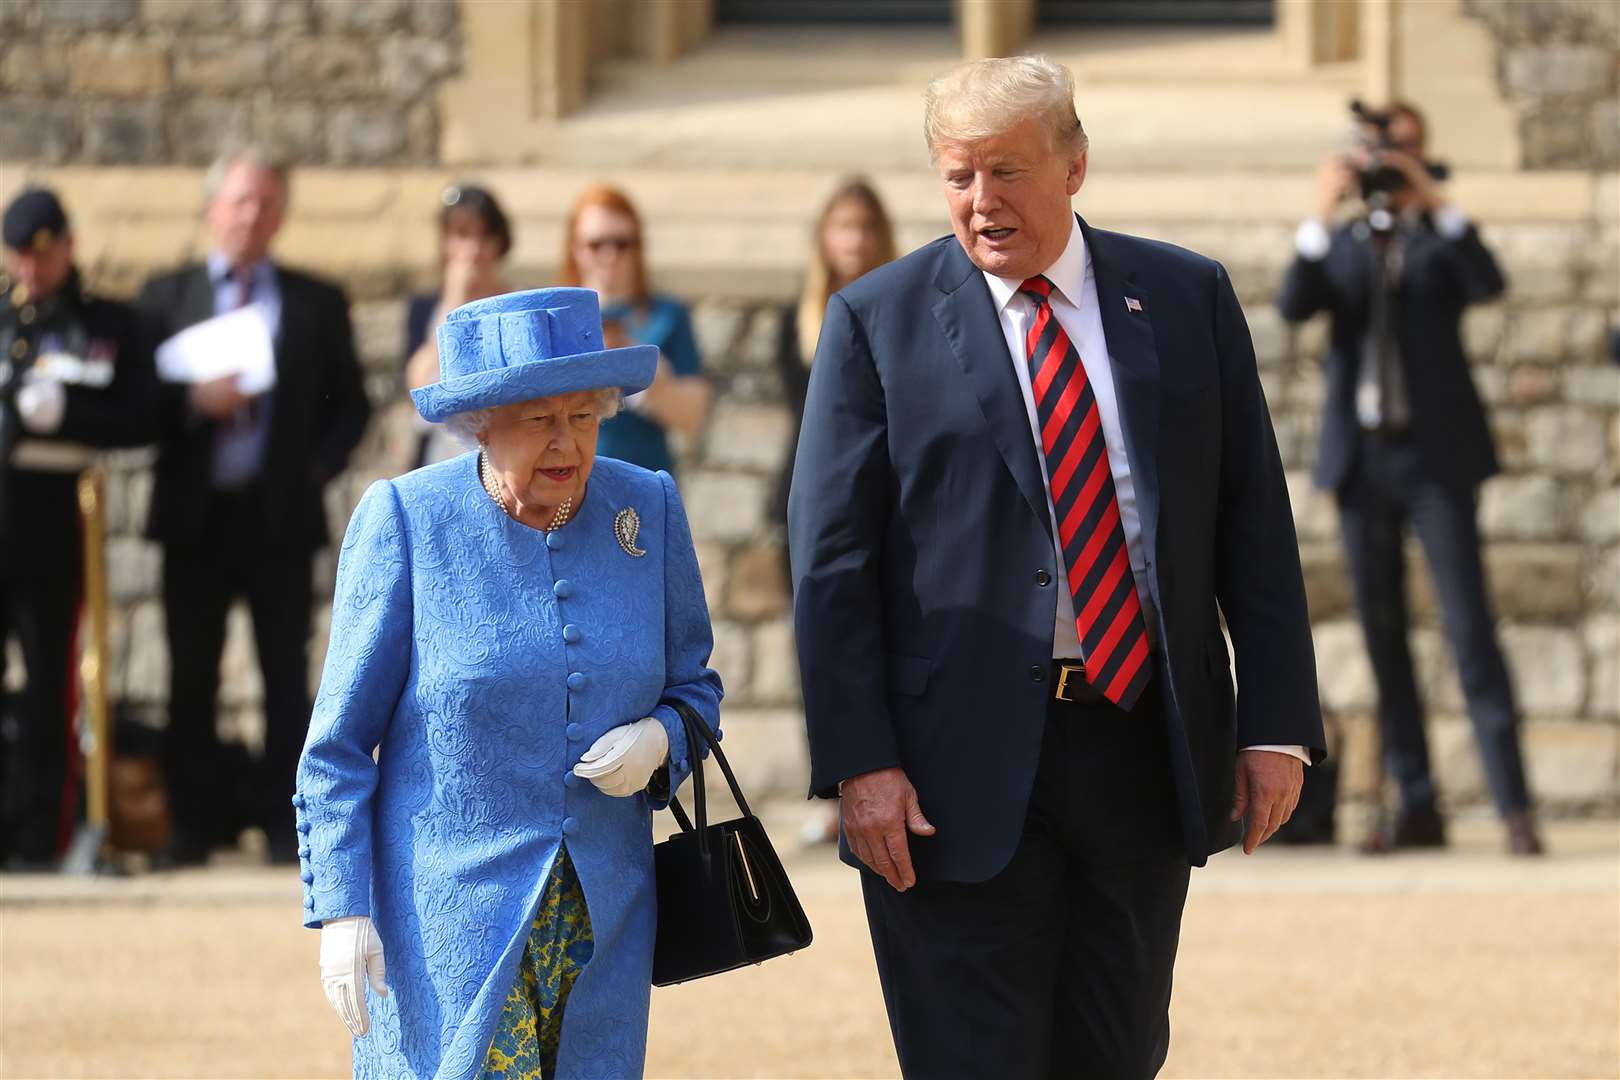 The Queen and Mr Trump during their first meeting at Windsor Castle. Chris Jackson